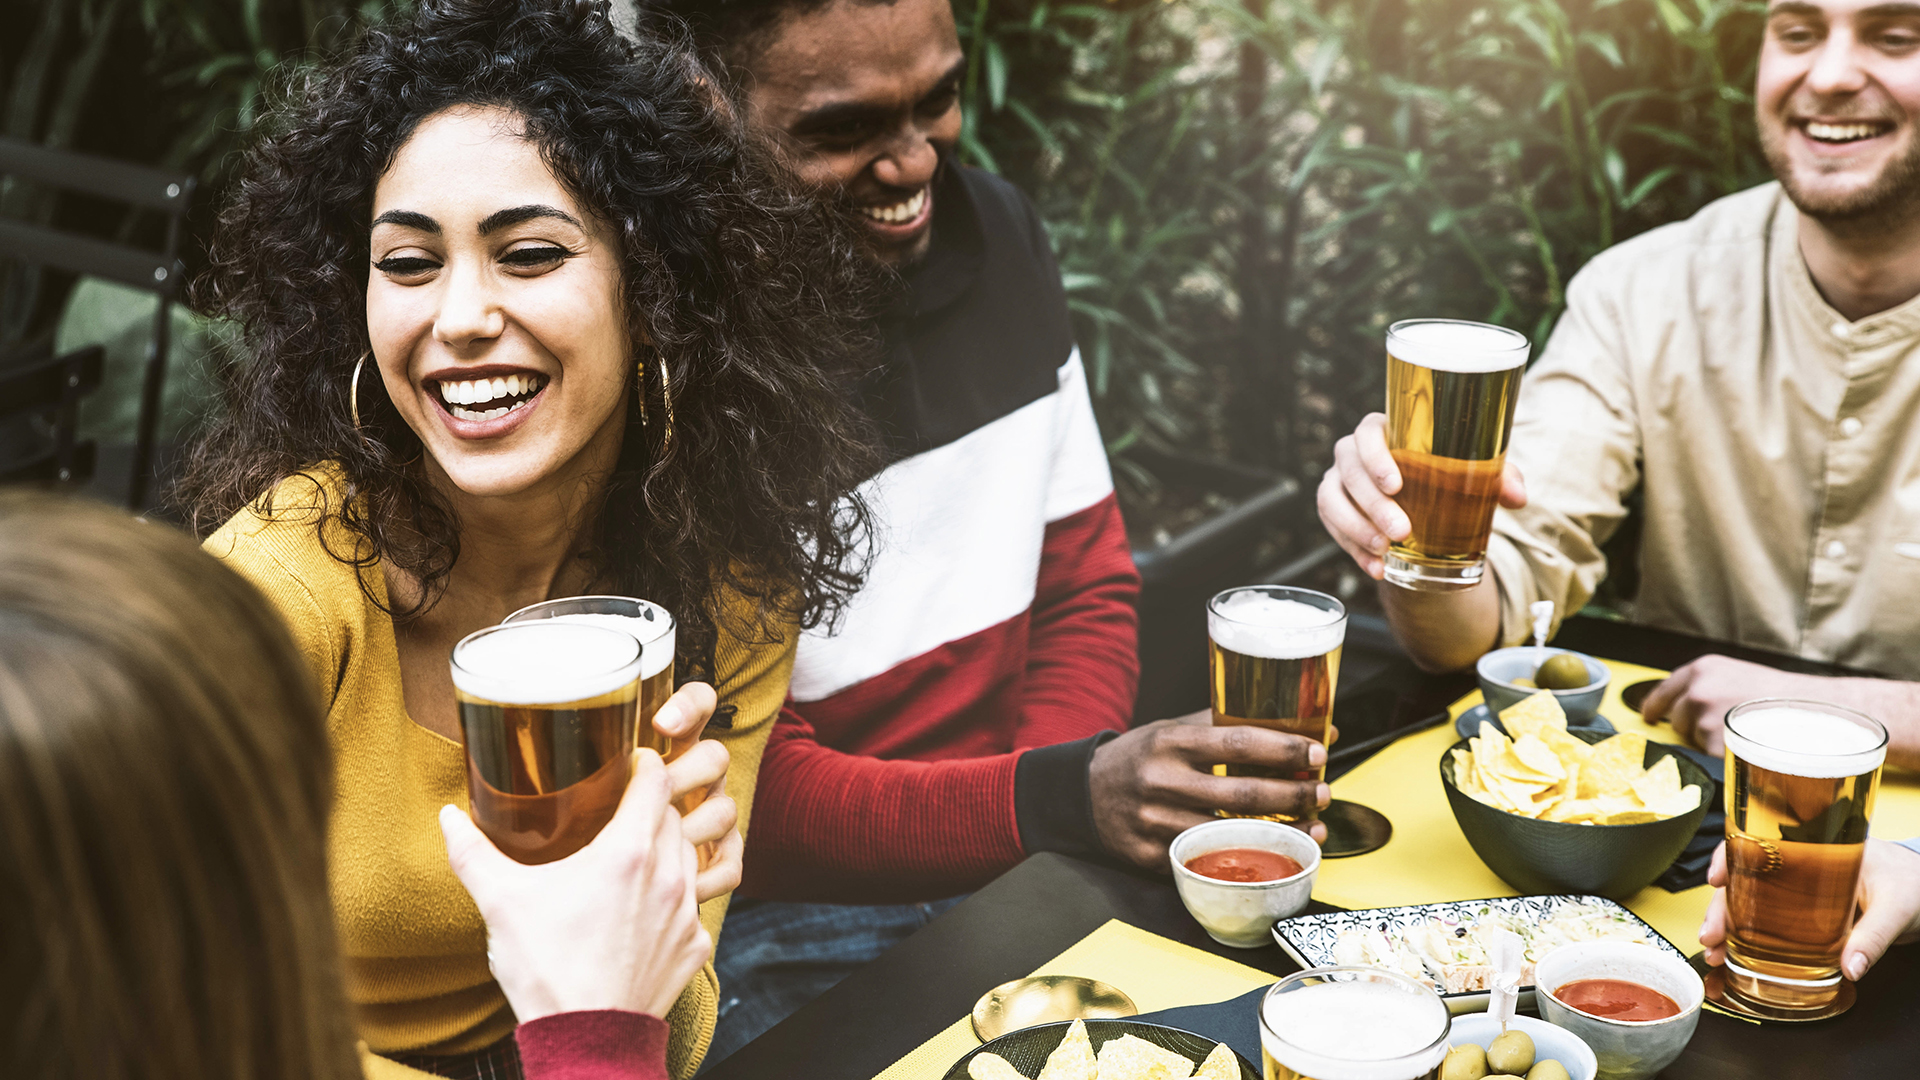 Multi-ethnic friends enjoying happy hour drinking beer at brewery pub – Group of young people celebrating weekend having an aperitif at bar restaurant – Beverage lifestyle and friendship concept